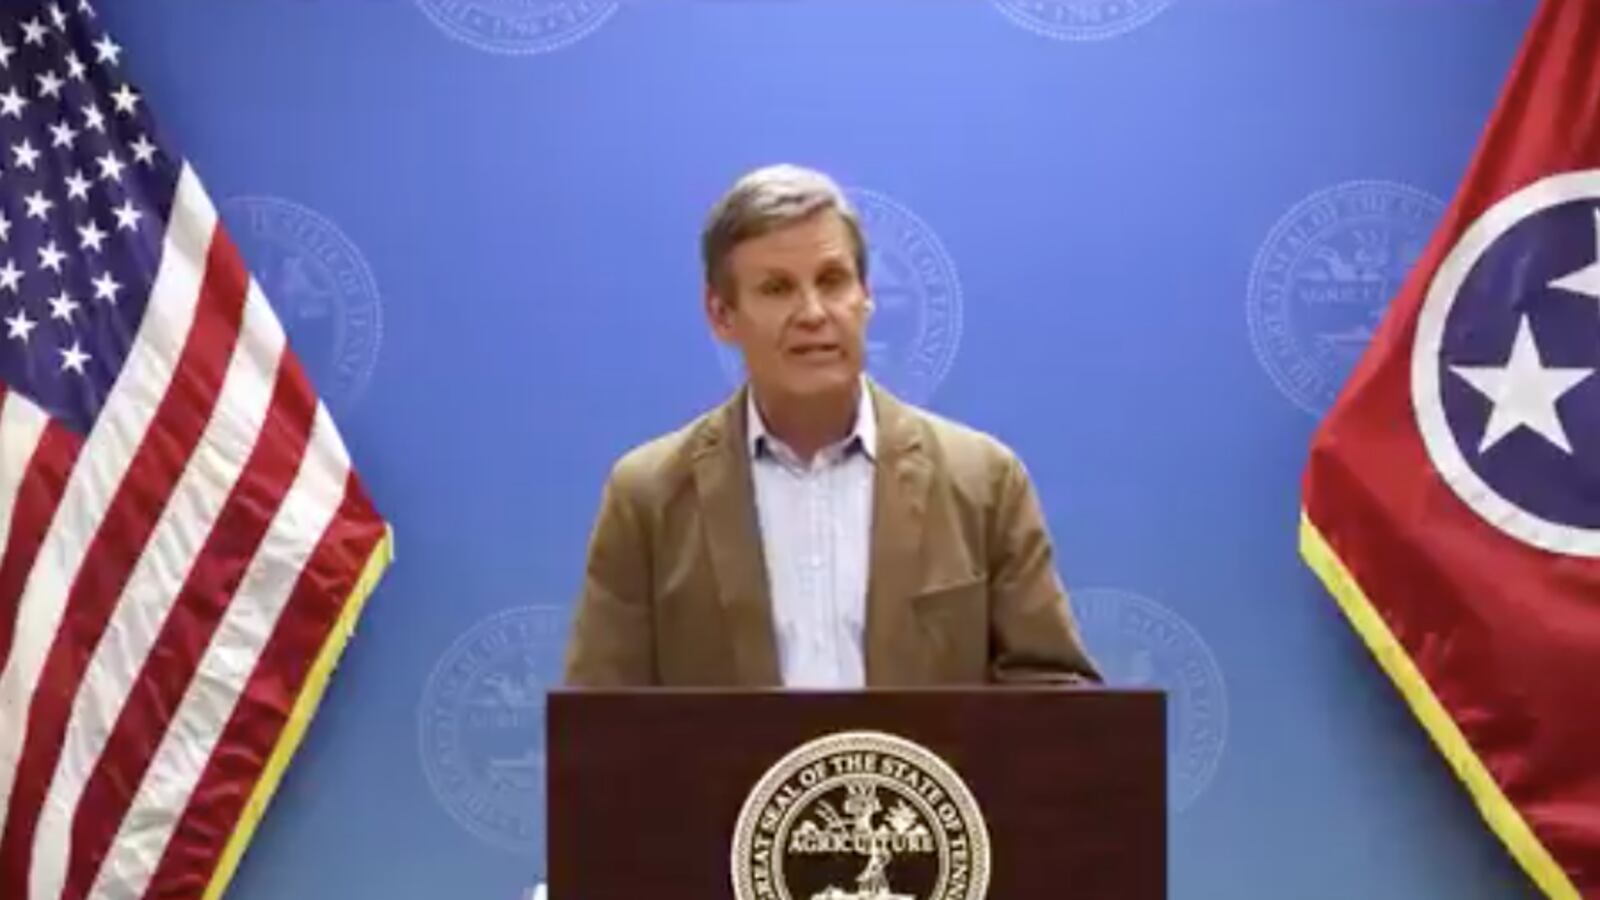 Gov. Bill Lee conducts his daily press briefing on Tennessee's response to the coronavirus pandemic.